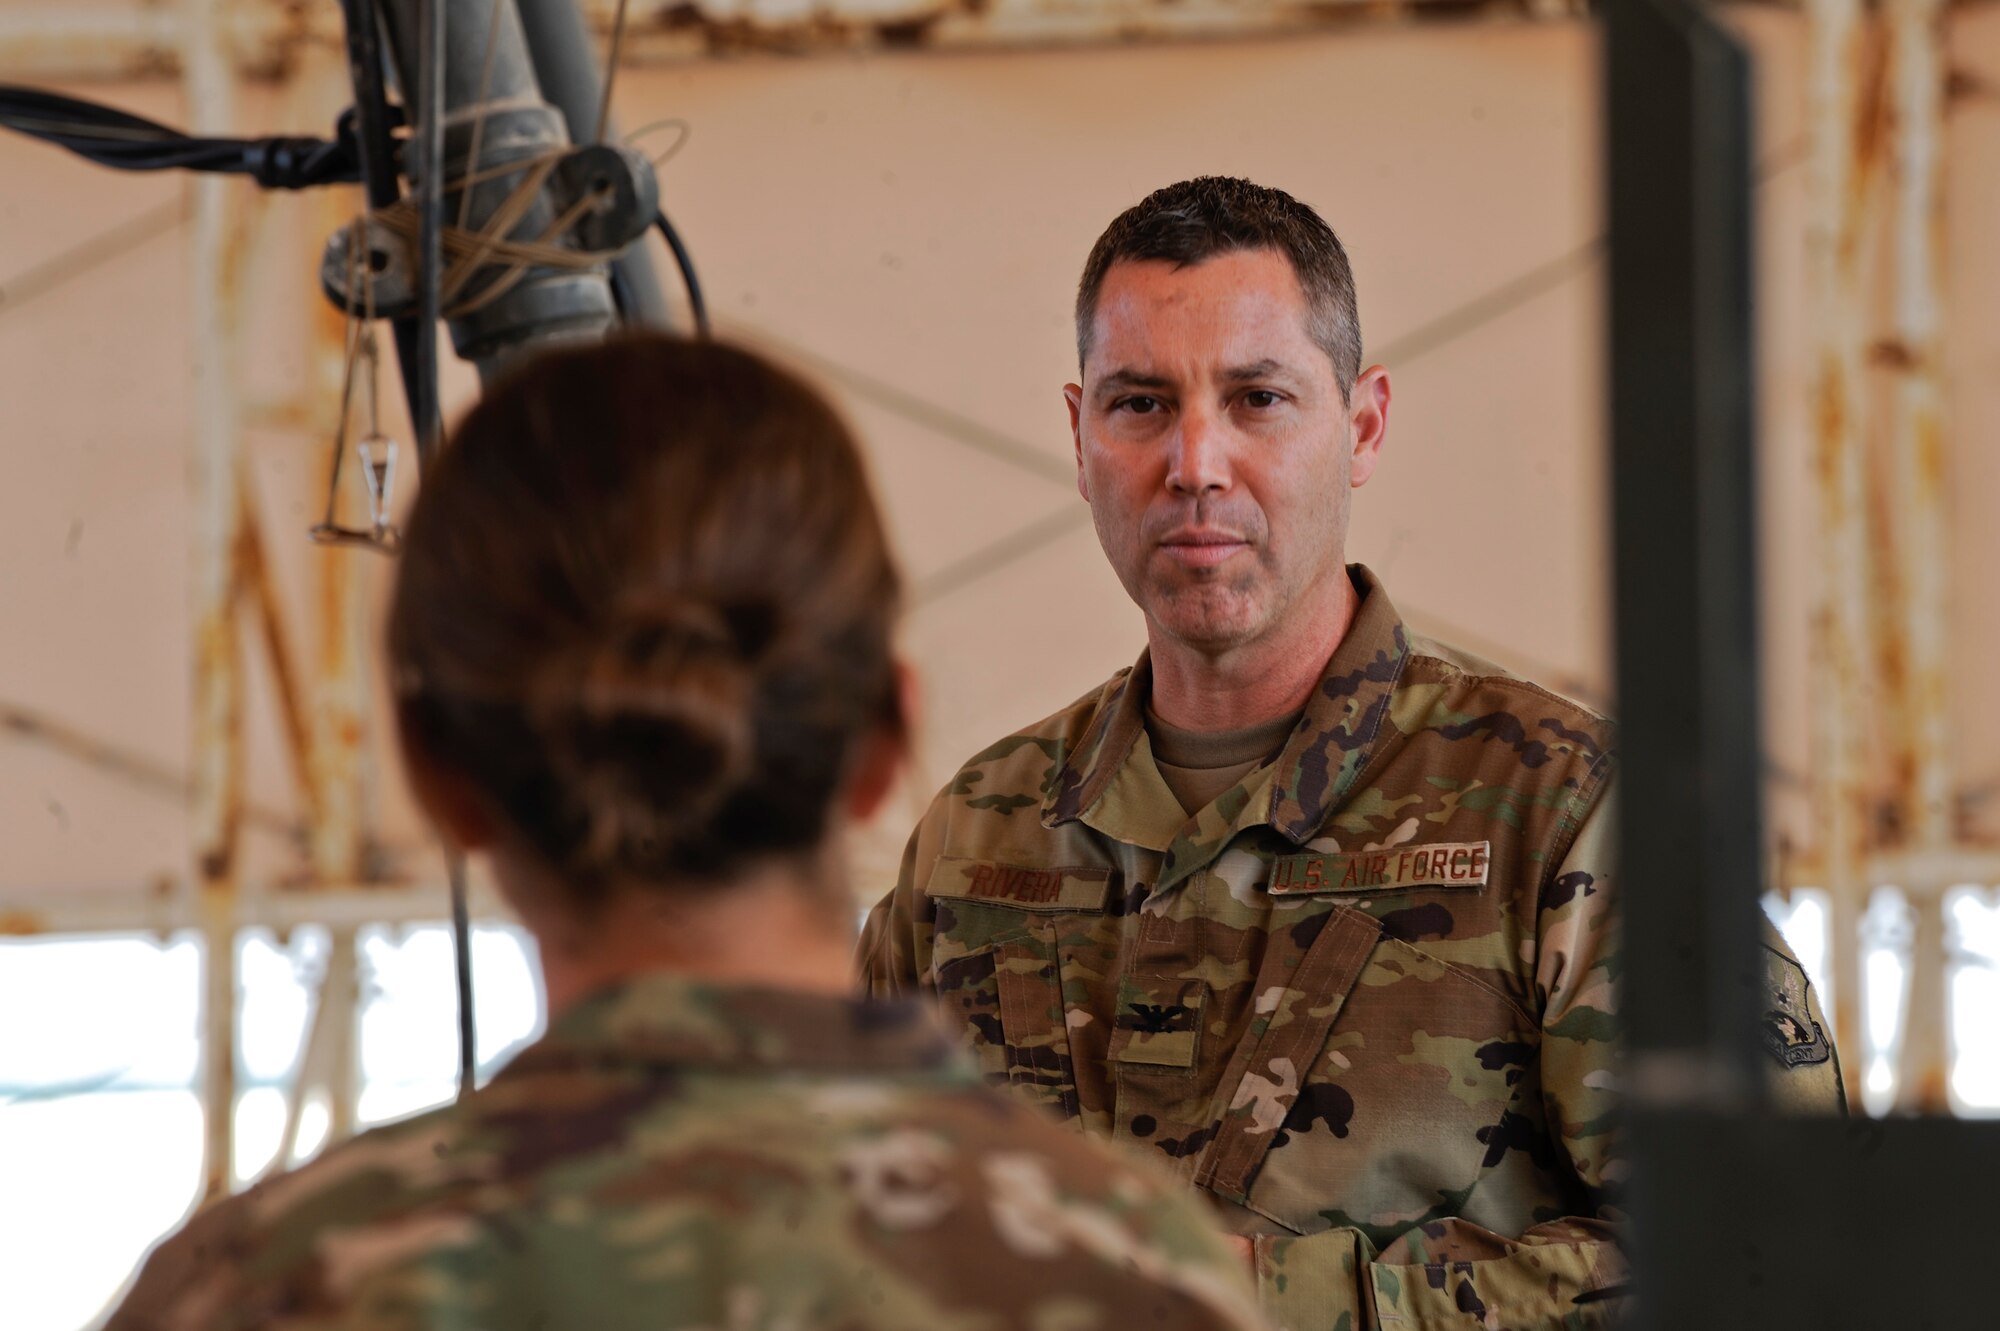 U.S. Air Force Col. Eric Rivera, U.S. Air Forces Central Command air reserve component advisor, speaks to Airmen at the ammunition compound on Al Dhafra Air Base, United Arab Emirates, Feb. 7, 2018. Directed by AFCENT in support of United States Central Command, the 380th Air Expeditionary Wing delivers decisive air, space, and cyberspace capabilities throughout the region. (U.S. Air Force photo by Airman 1st Class D. Blake Browning)